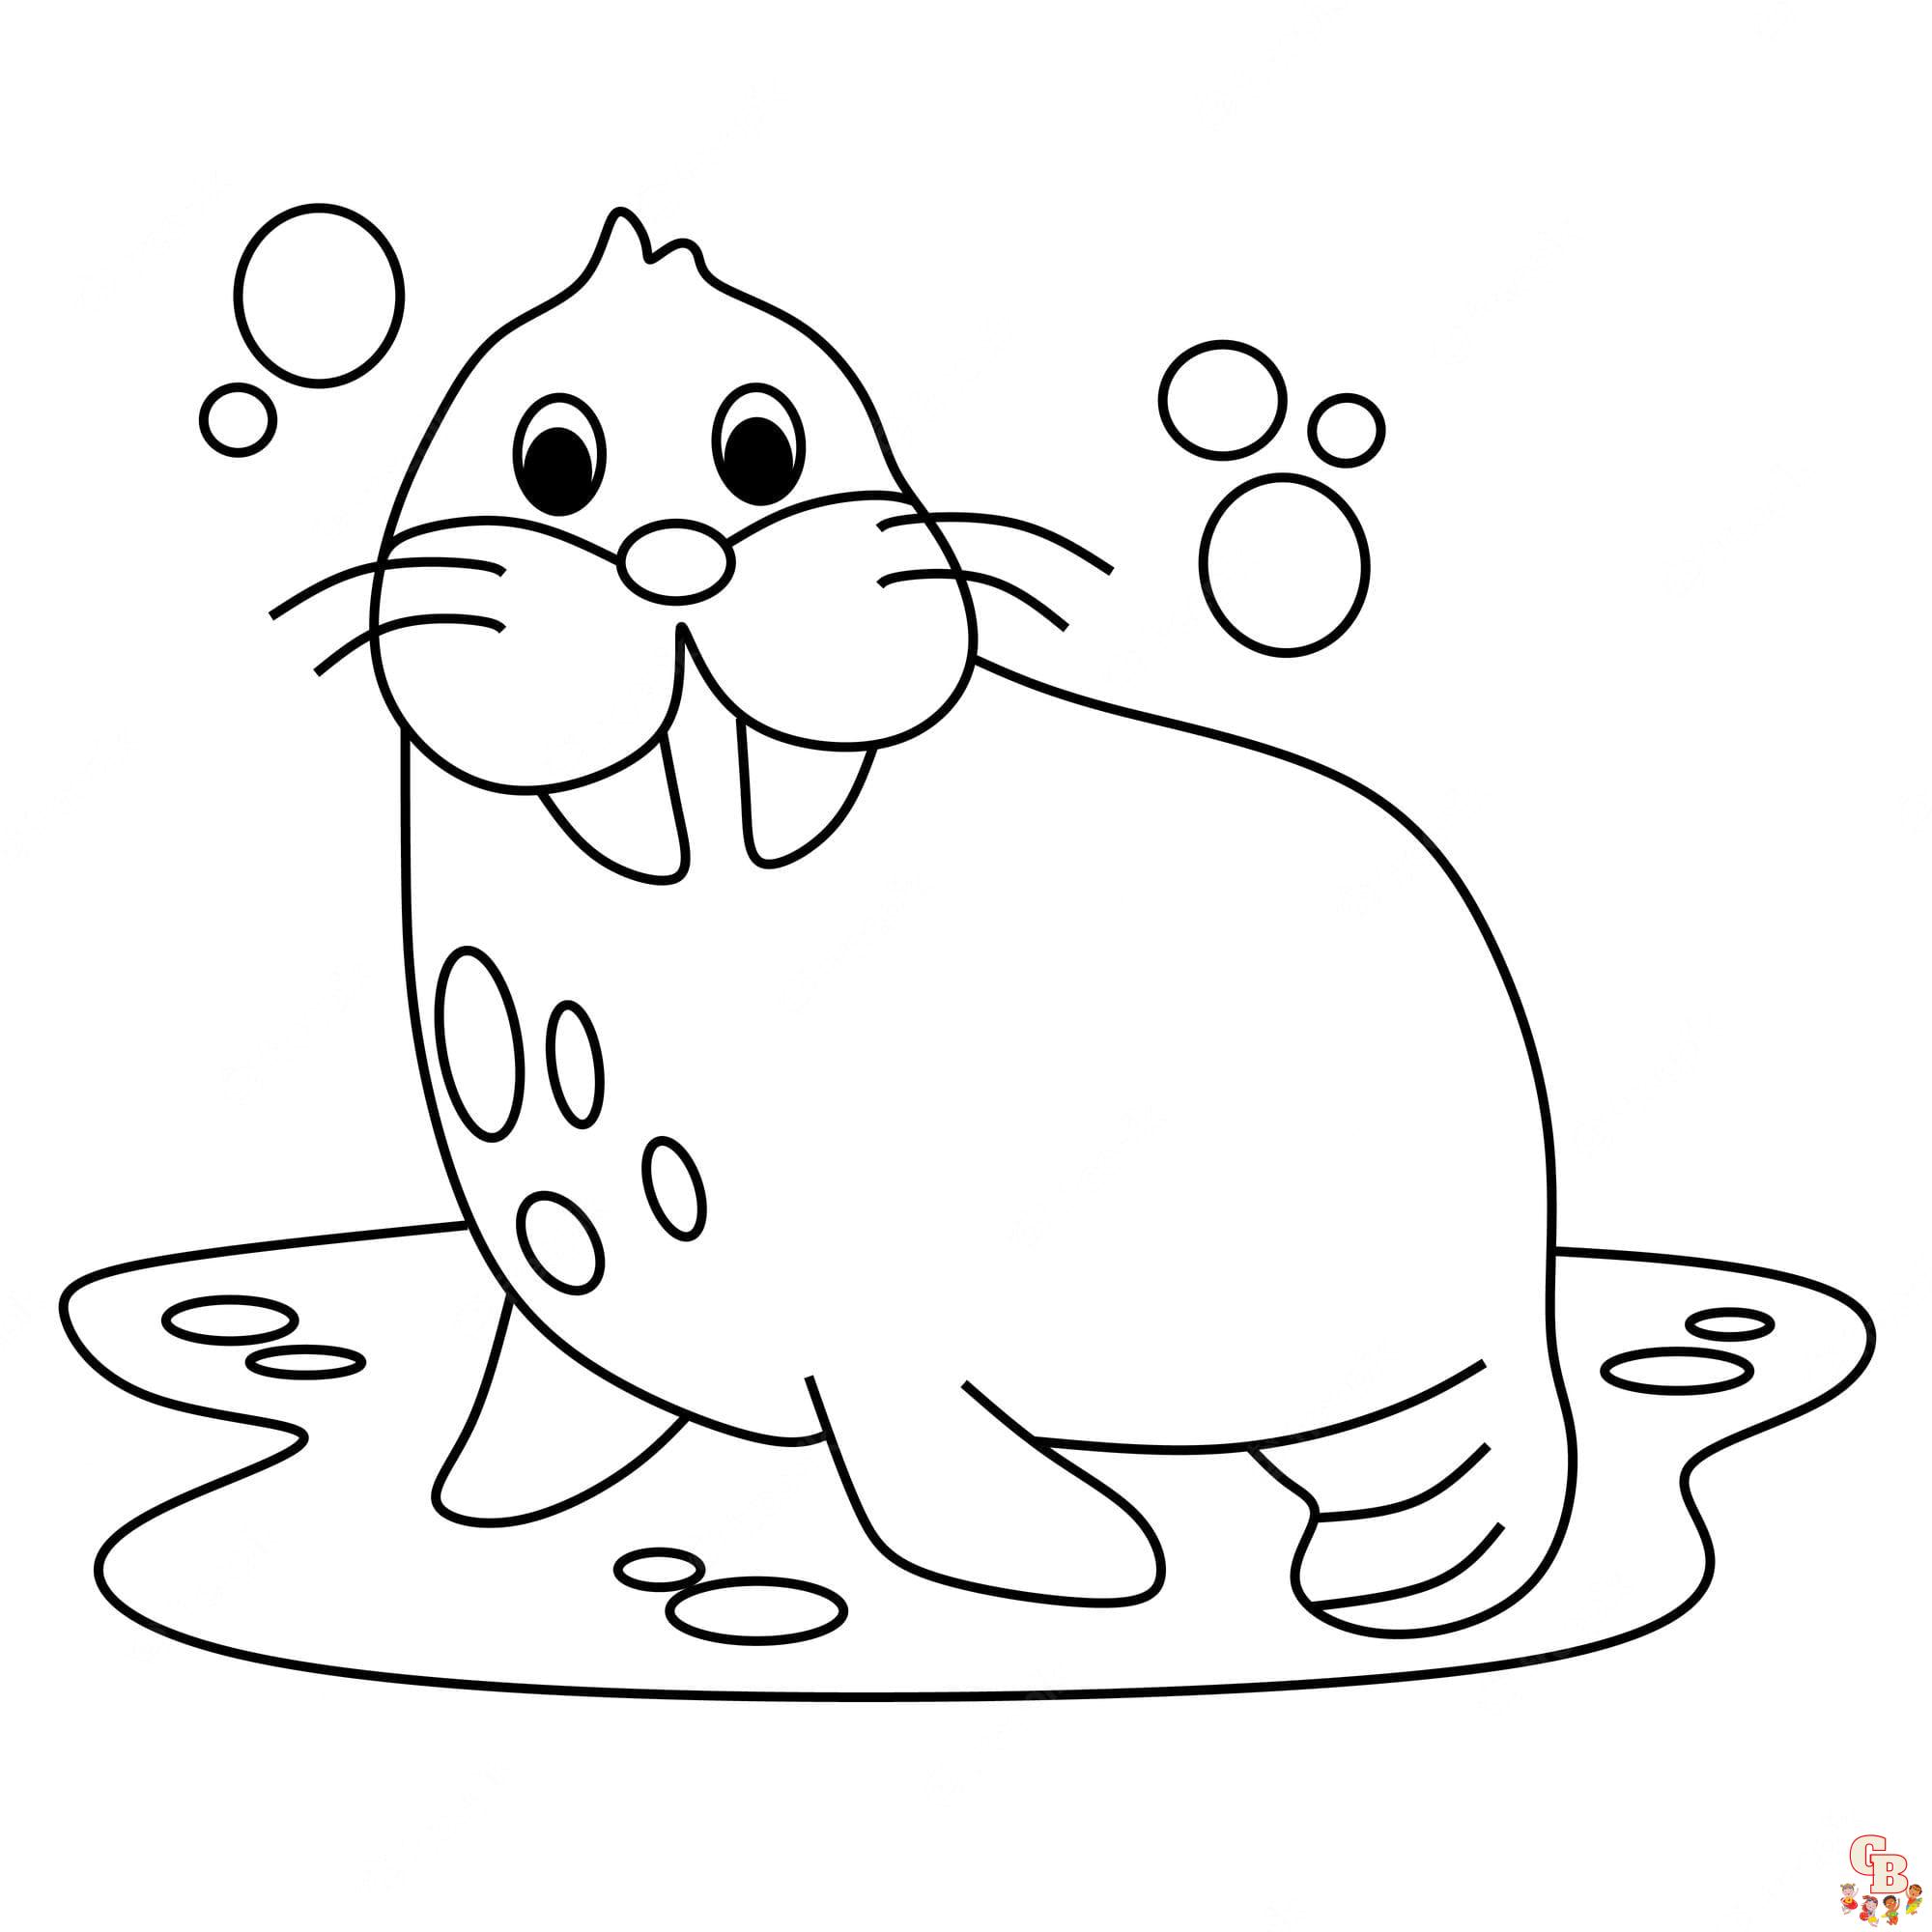 Walrus Coloring Pages